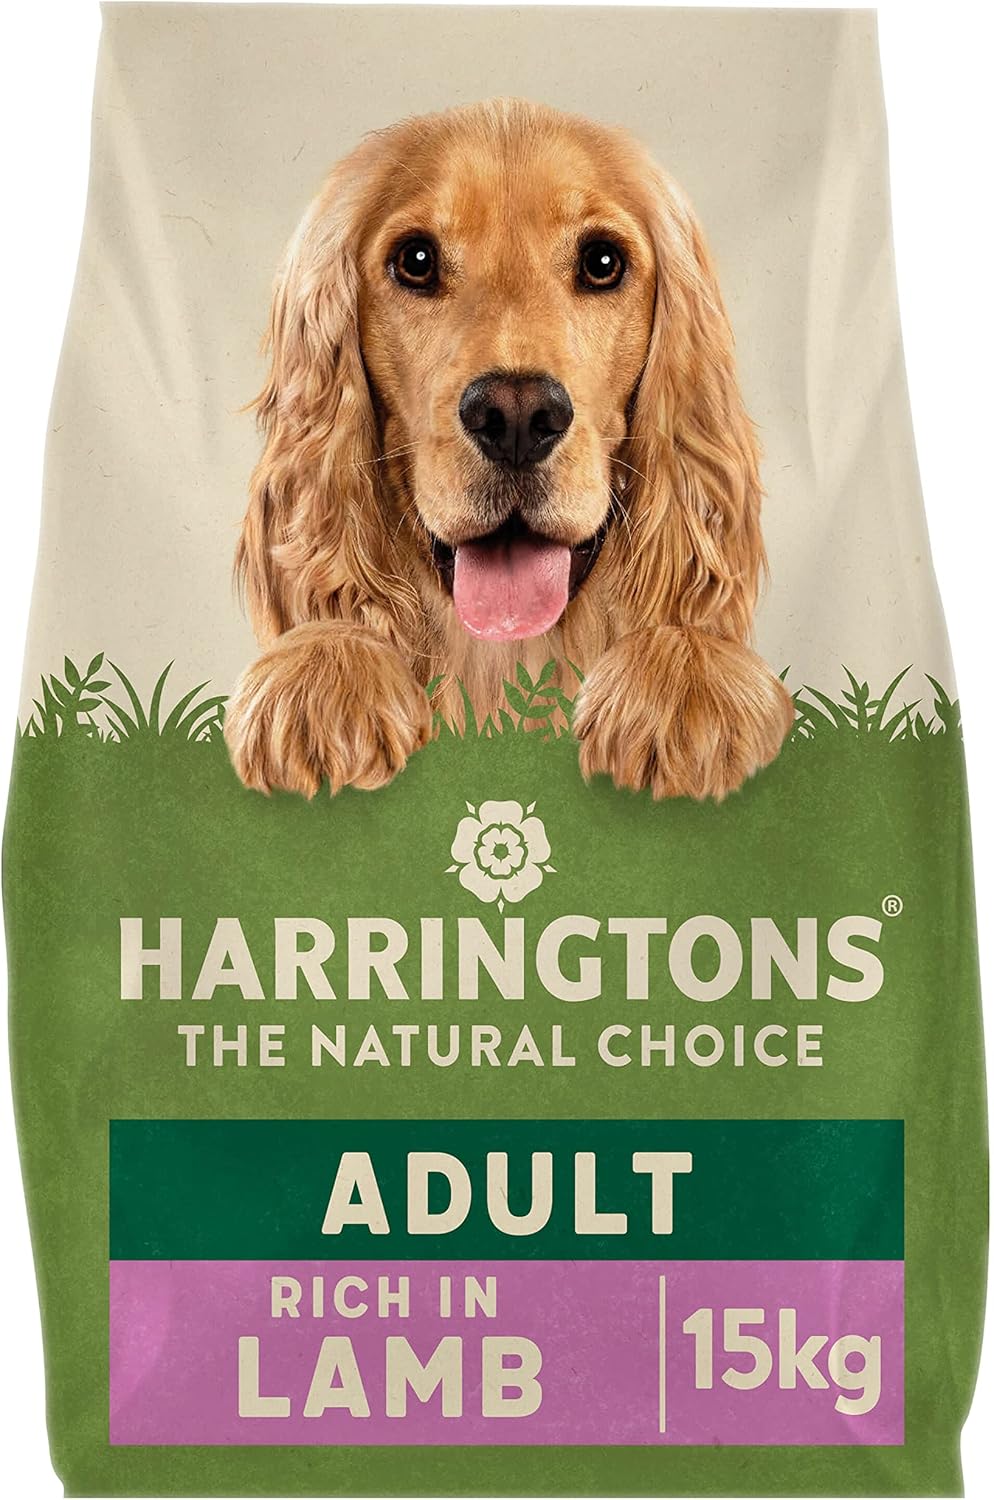 Harringtons Complete Dry Adult Dog Food Lamb & Rice 15kg - Made with All Natural Ingredients?107645327